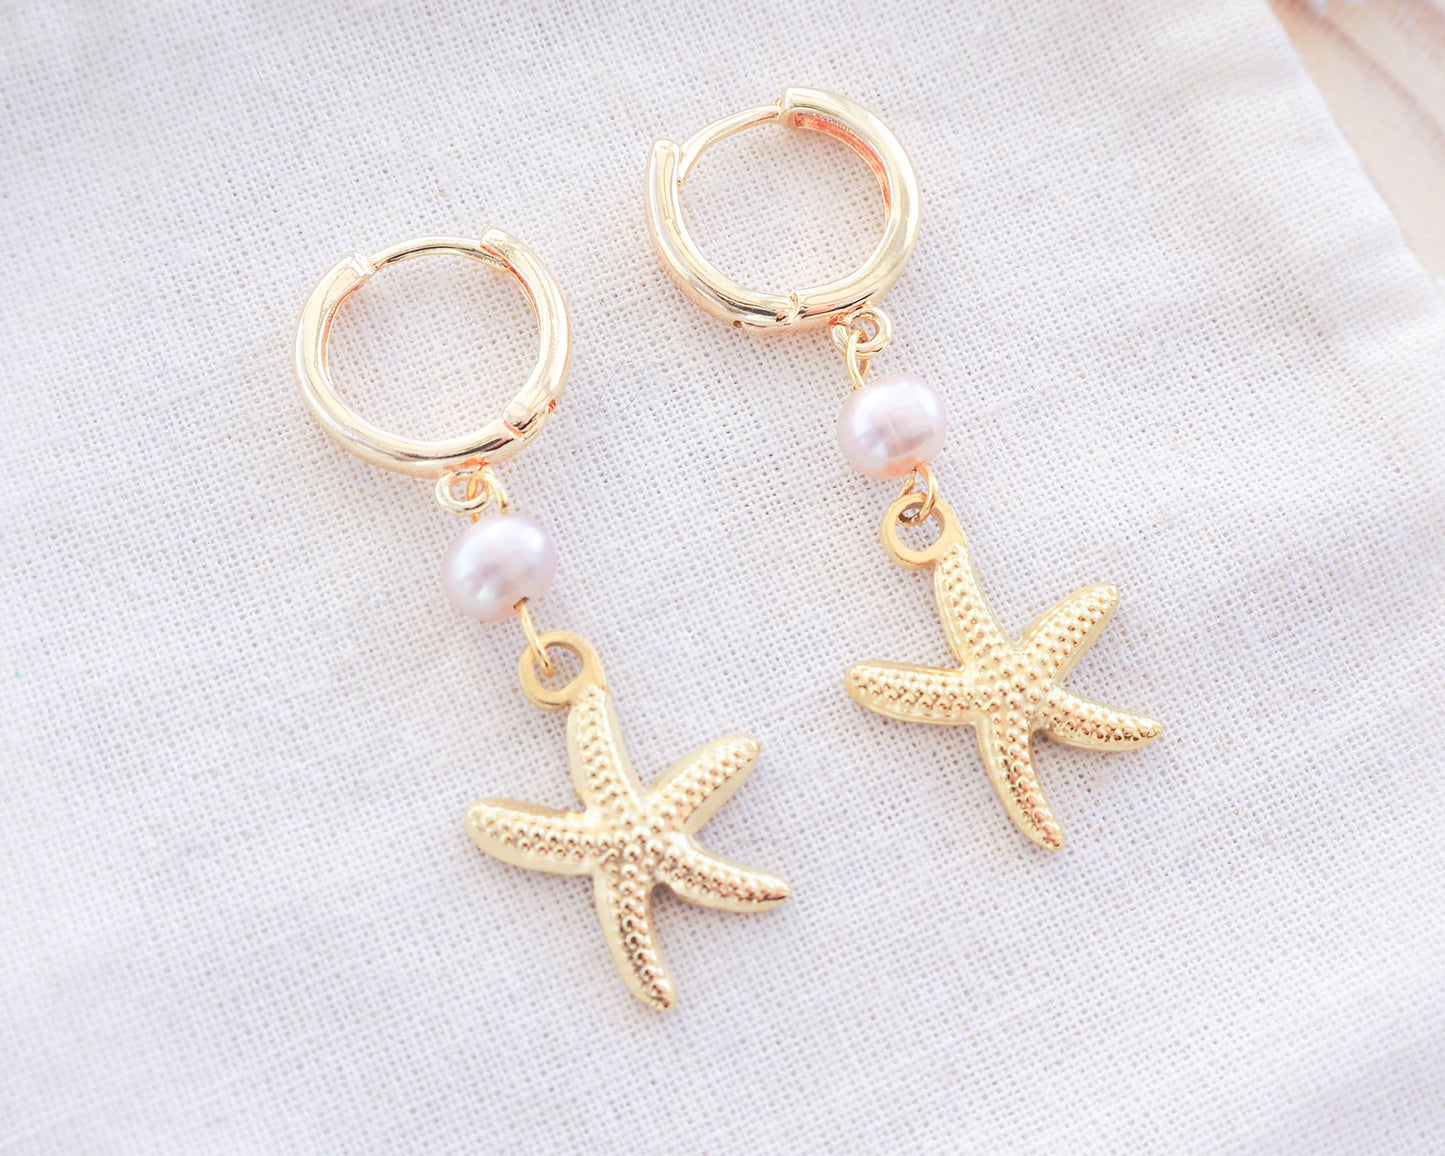 Close-up of Gold Sea Star Freshwater Pearl Earrings with StarfishCharm , Ocean Inspired Jewelry